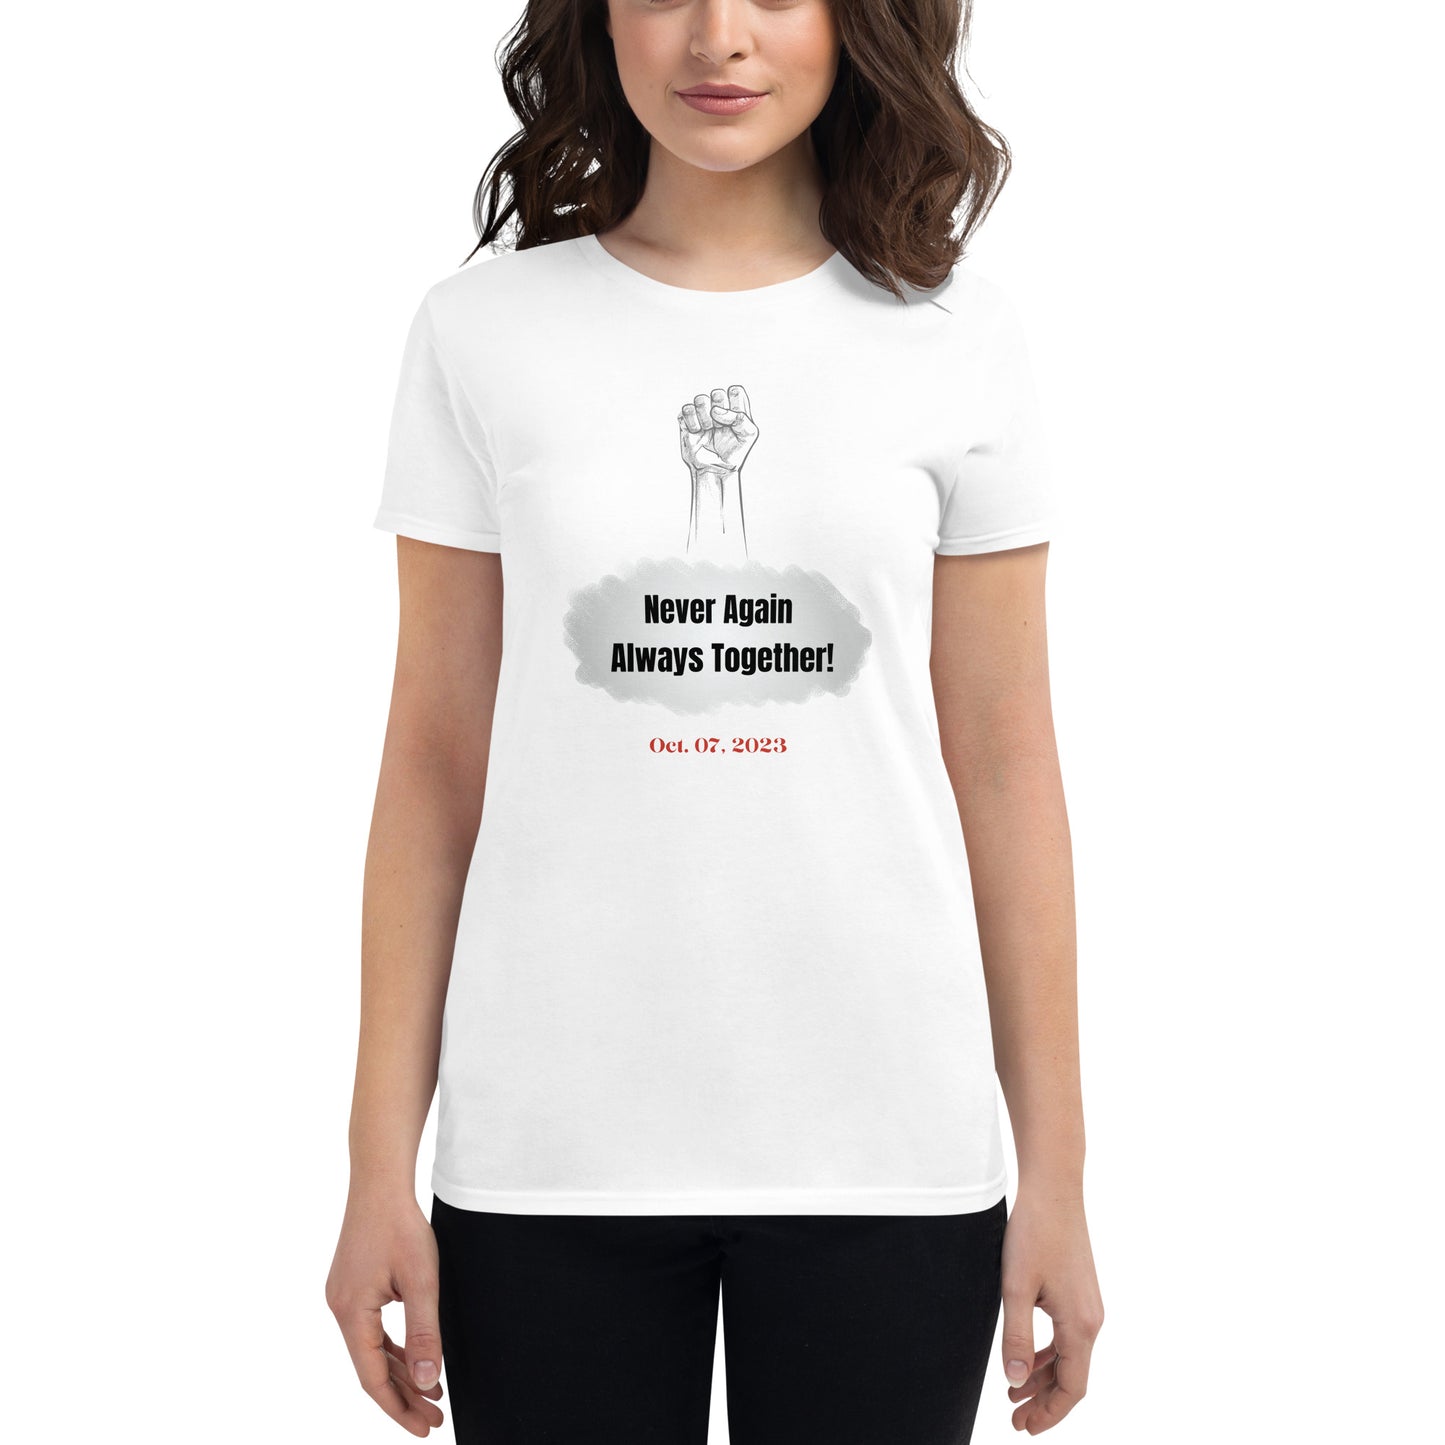 Never again. Always together - Women's short sleeve t-shirt (5 colors)